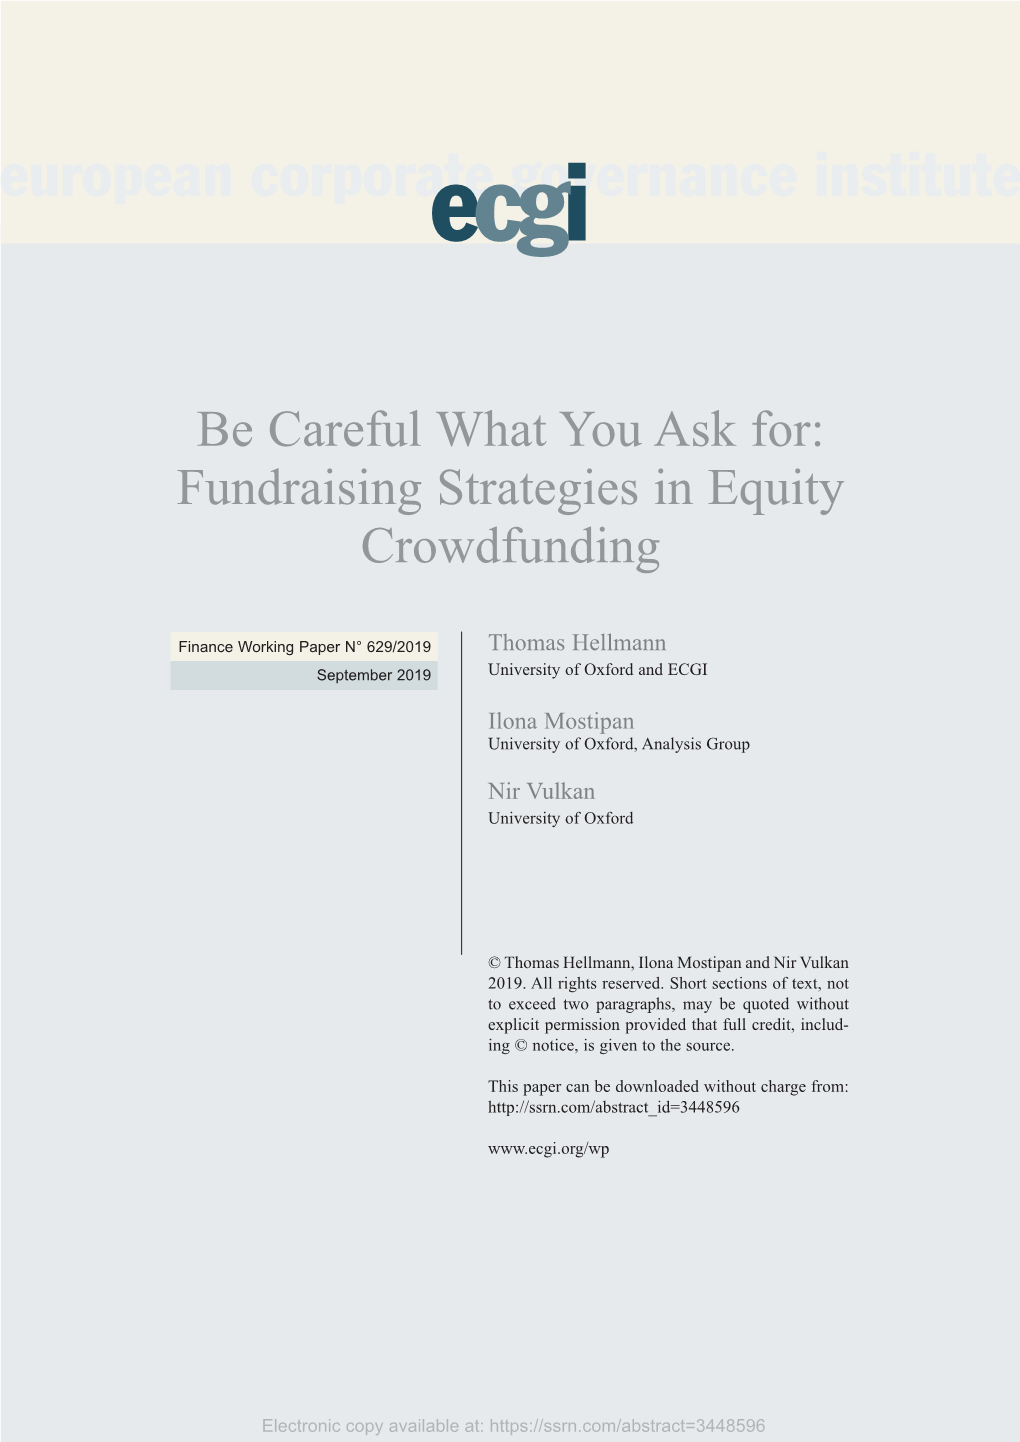 Be Careful What You Ask For: Fundraising Strategies in Equity Crowdfunding